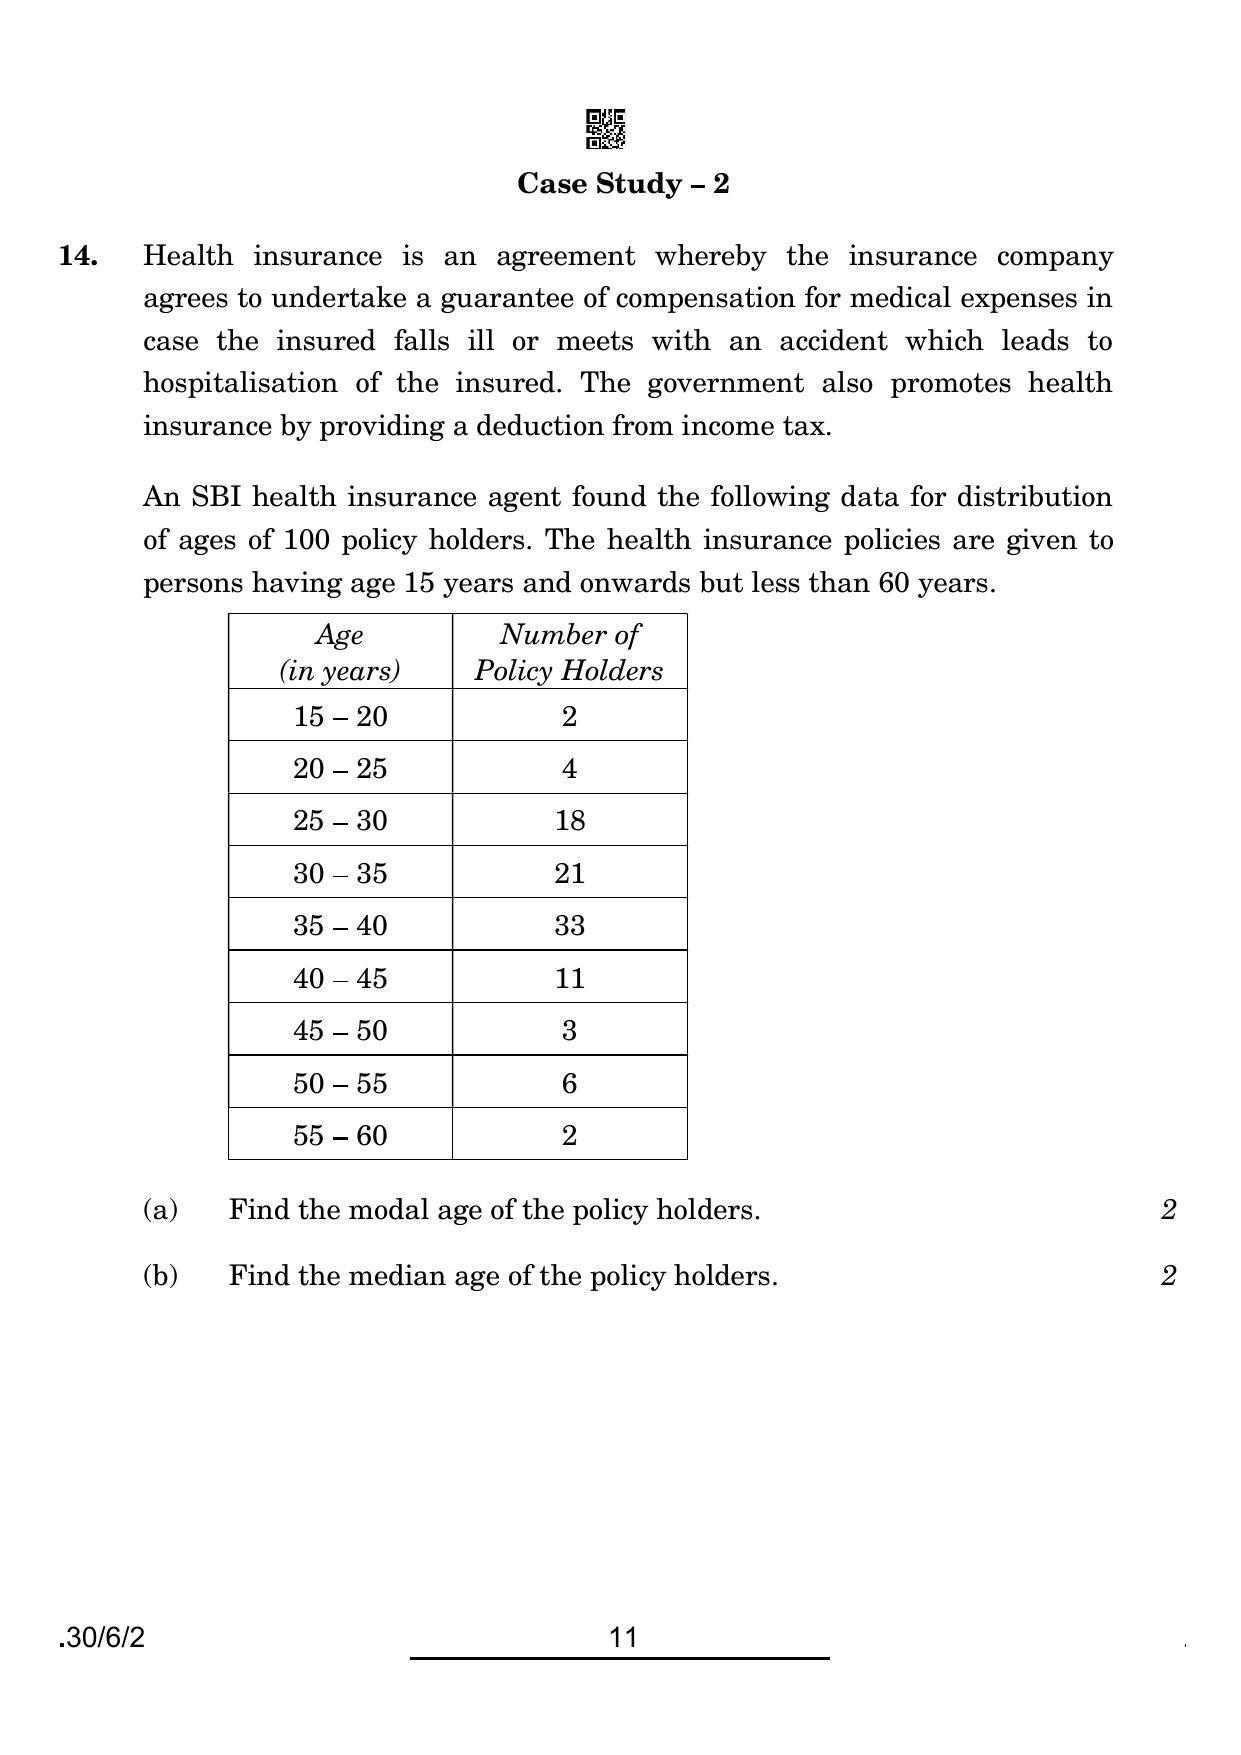 CBSE Class 10 30-6-2 Maths Std. 2022 Compartment Question Paper - Page 11